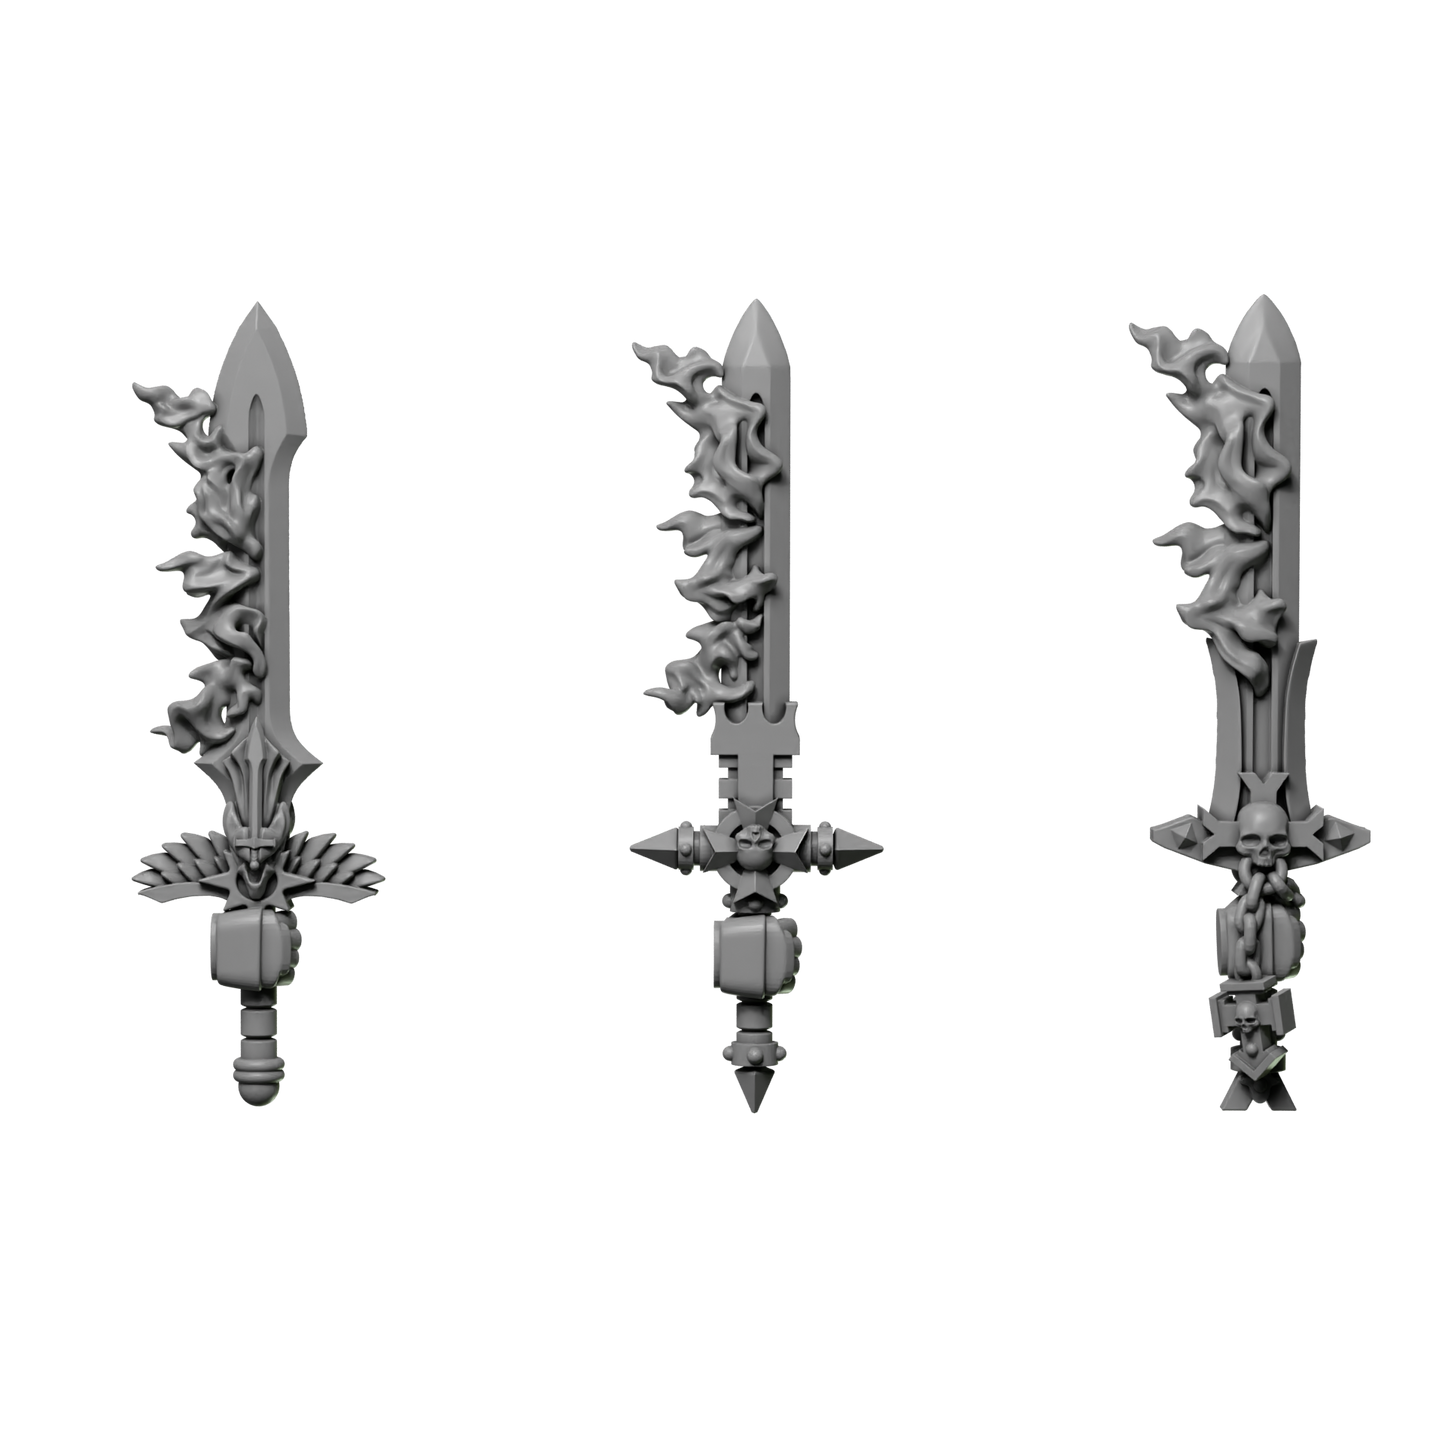 Flaming Power Swords Pack of Six For Sci Fi Battle Brother Space Warrior Marines Eternal Pilgrims by Greytide Studios. Available in Modern and Classic Scale for 28mm-32mm Tabletop Wargaming